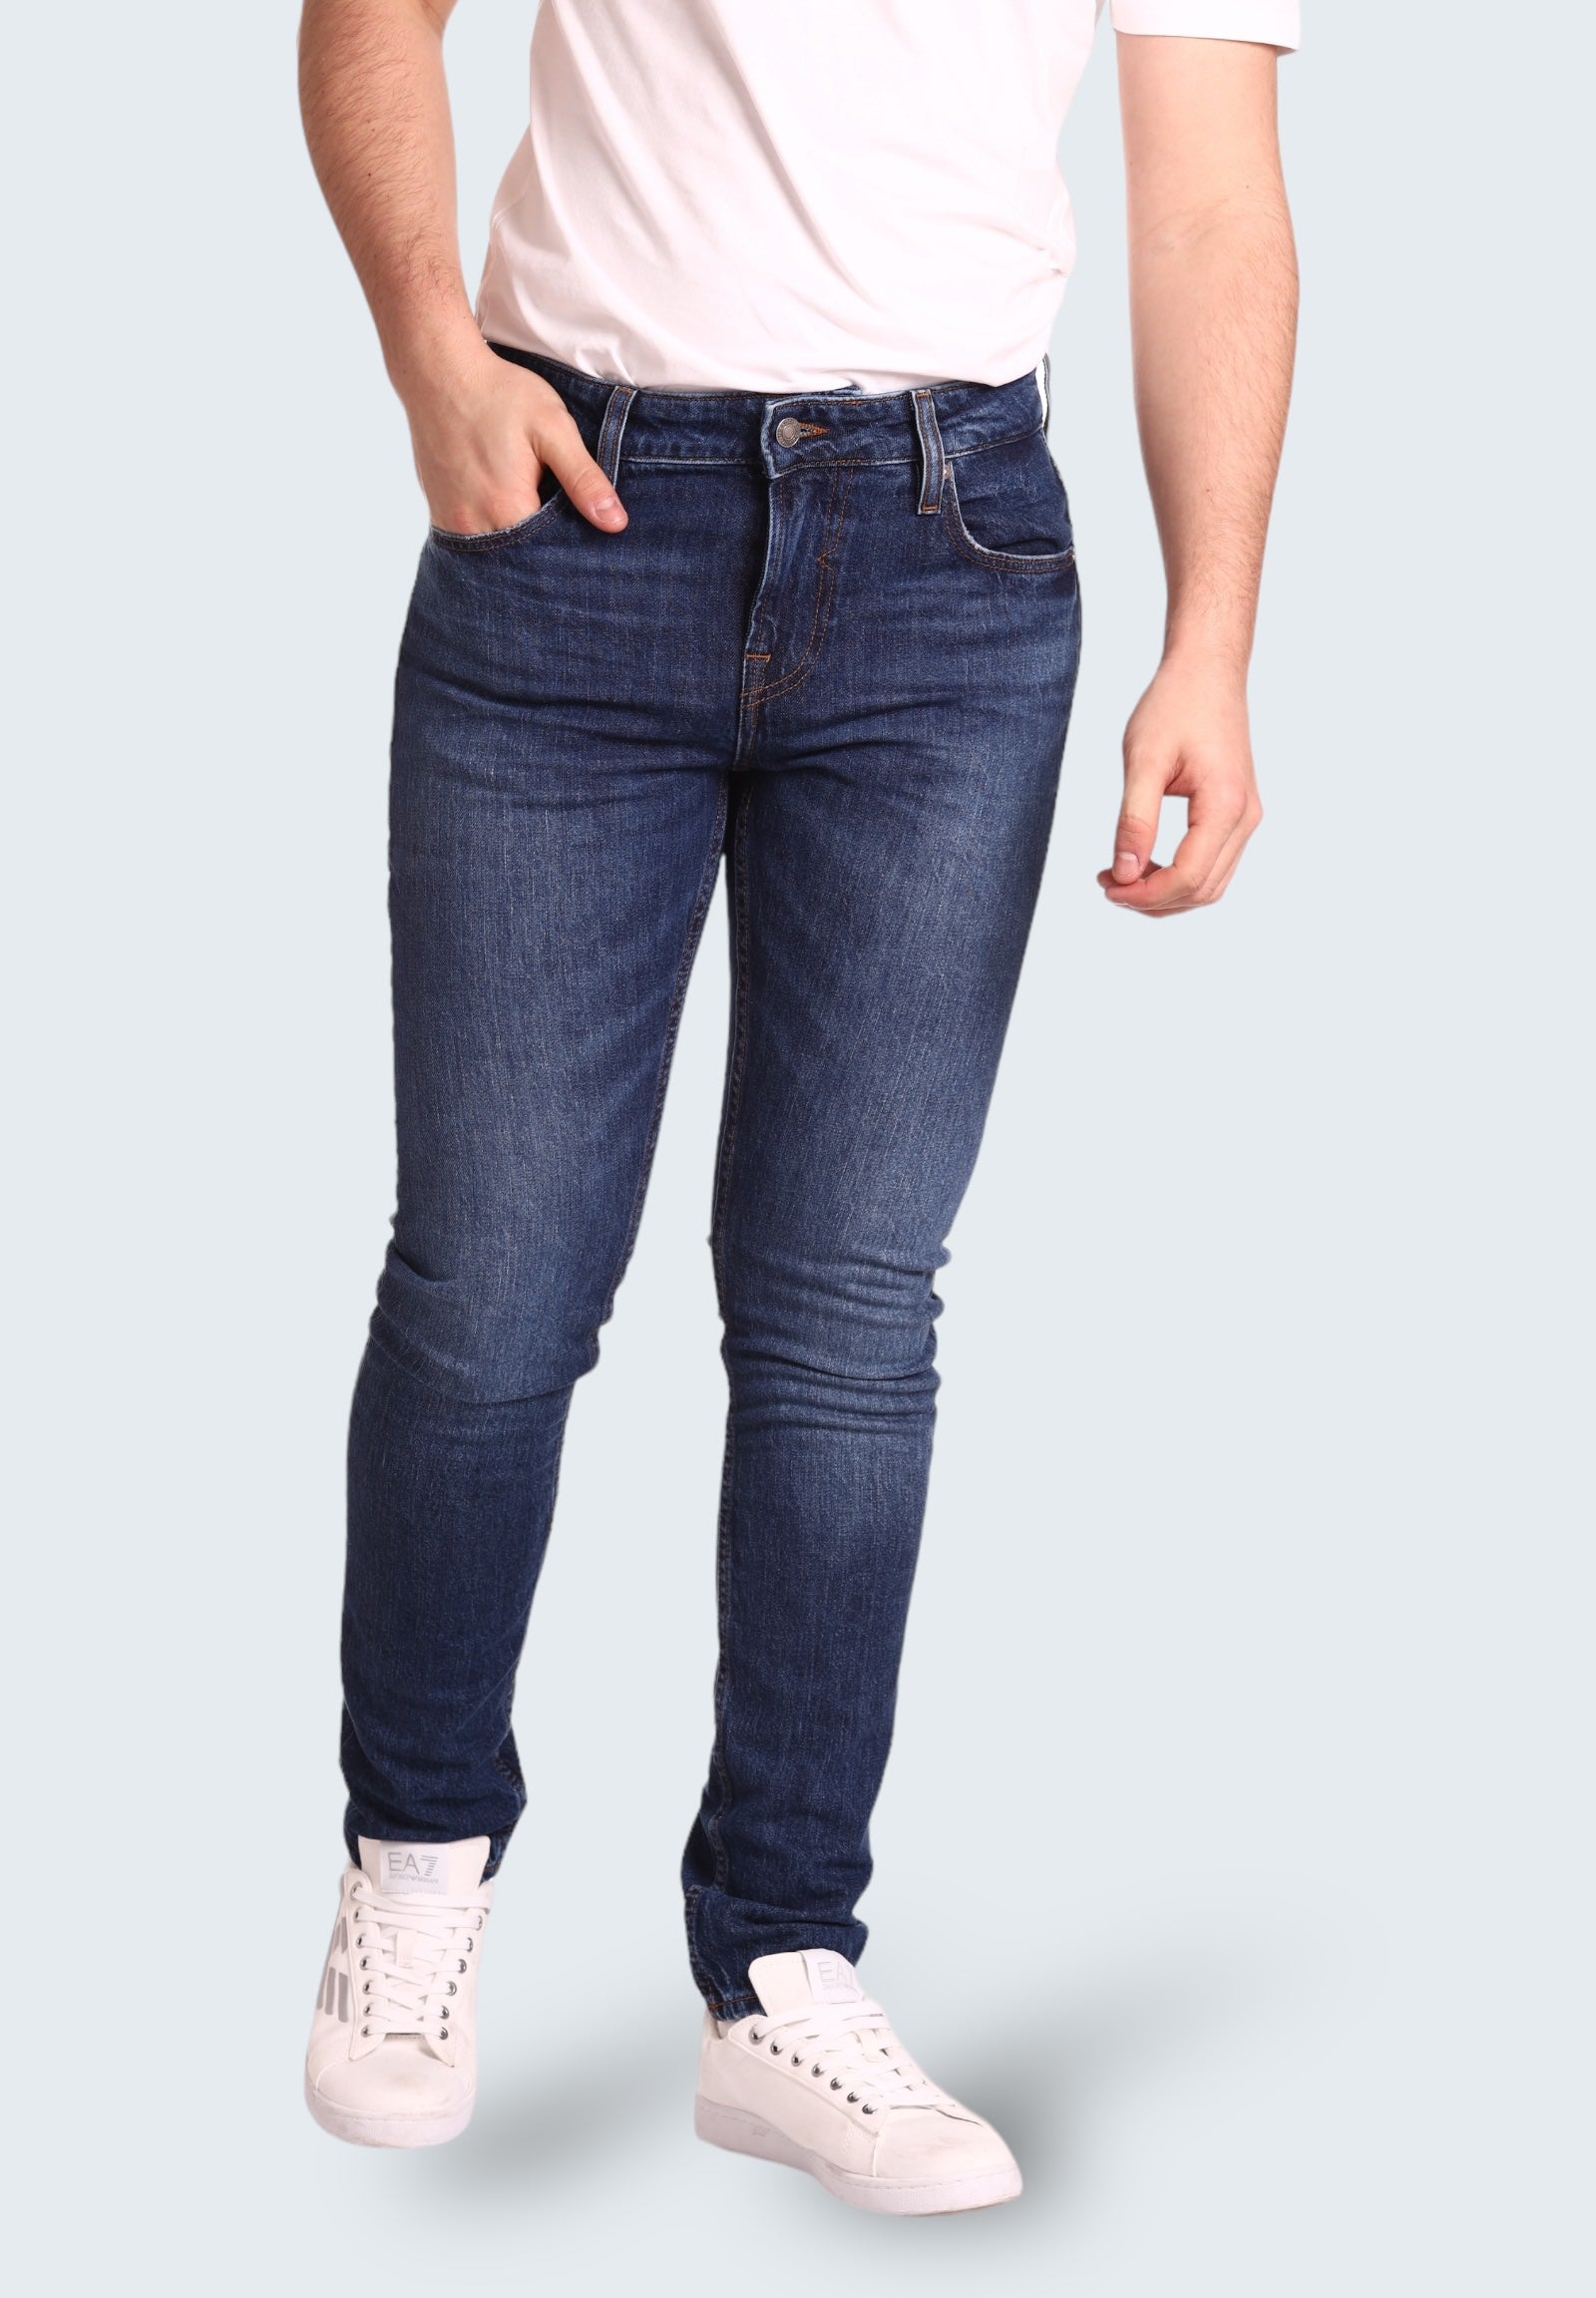 Guess Jeans Man Jeans M4ra27 The Tate